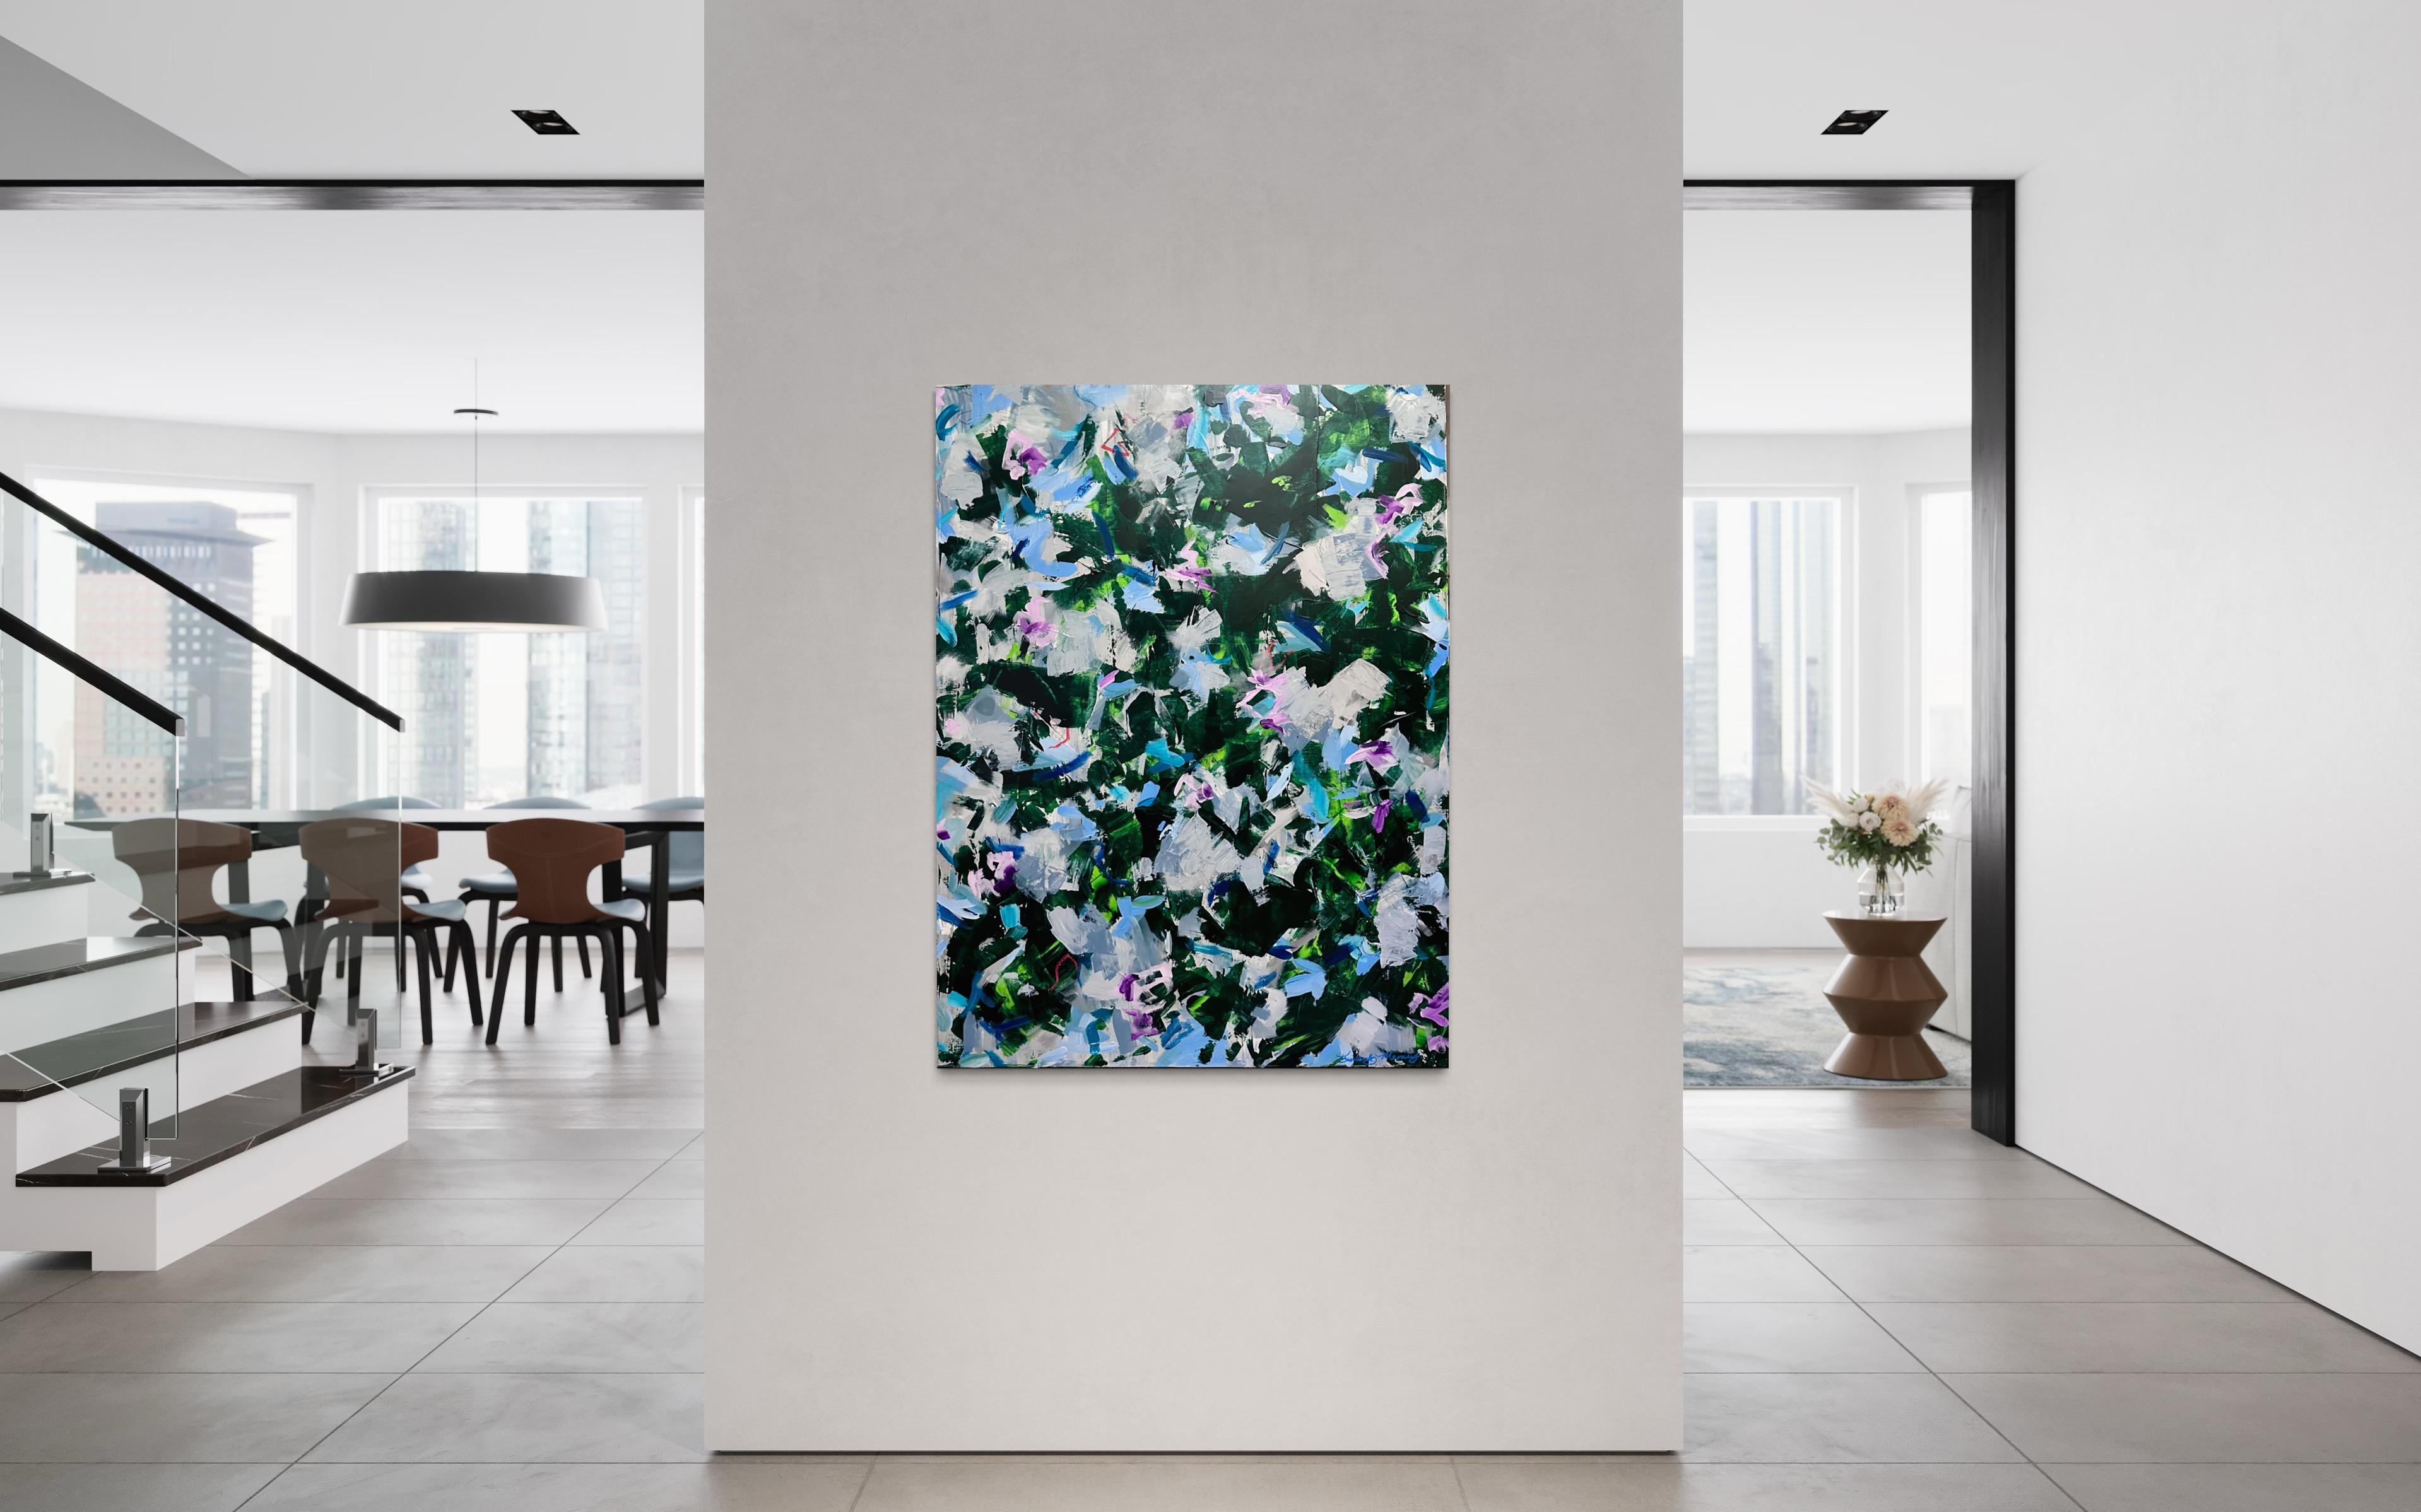 Kimberly Marney
Lush (Abstract, Green, Jungle, Fiddle Leaf Fig, Nature, Landscape)
2023
Acrylic on Canvas
Size: 40x30x1.5in
Signed by hand
COA provided
Ref.: 924802-1959

Tags: Abstract, green, jungle, fiddle leaf fig, nature, landscape

Lush